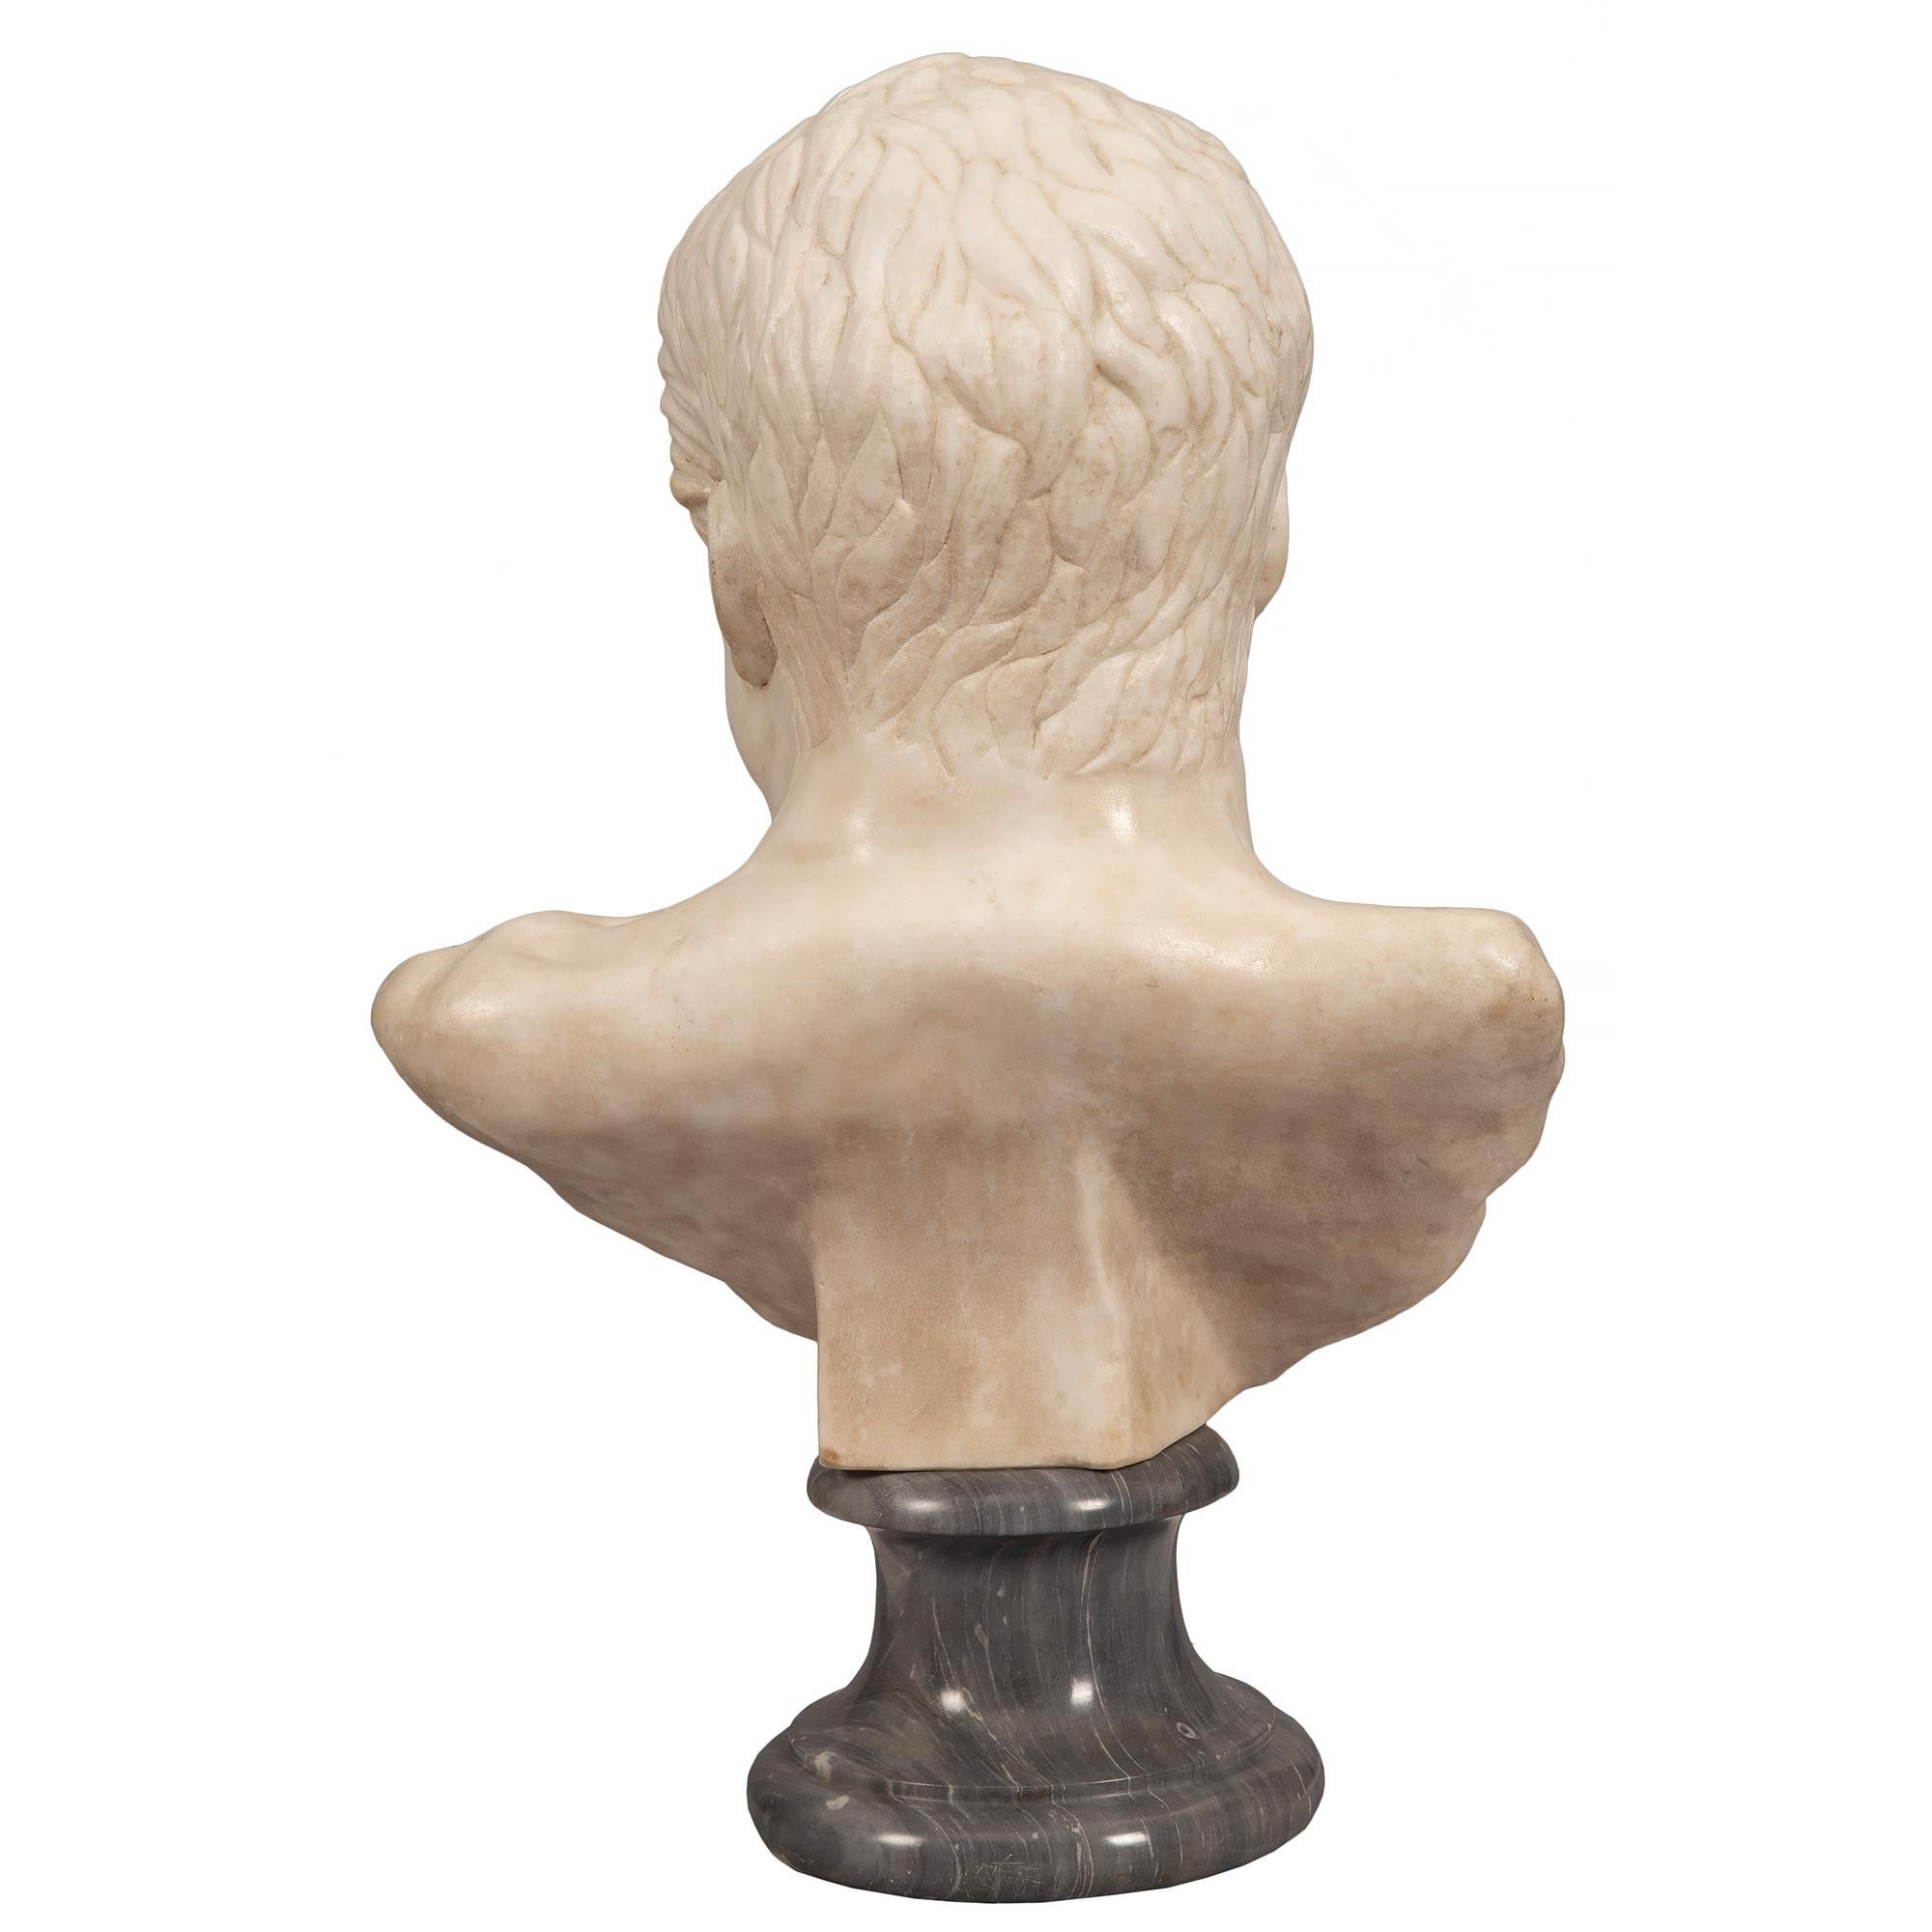 Italian Early 19th Century White Carrara Marble Bust of a Roman Emperor For Sale 1